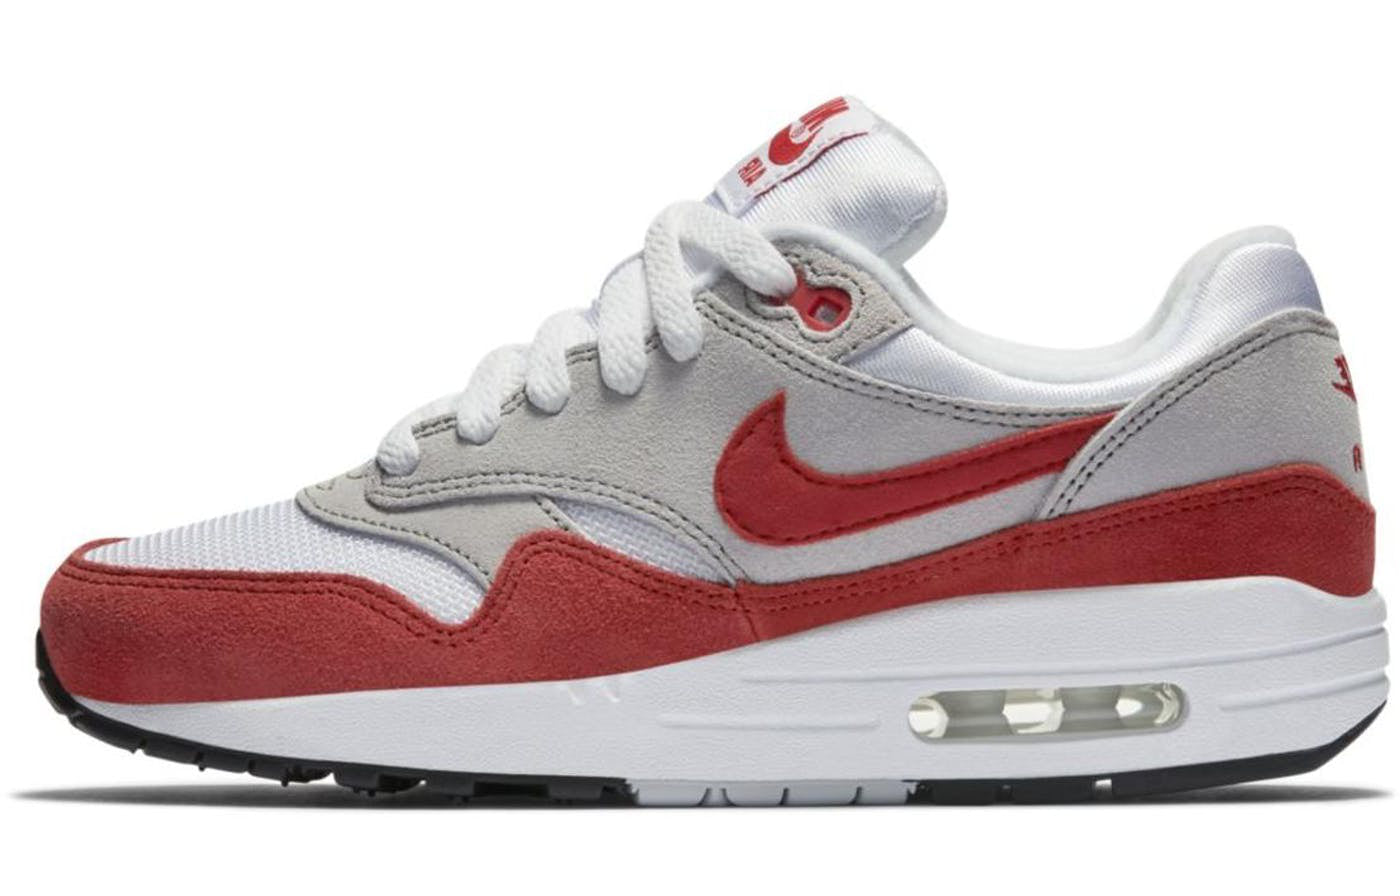 Nike Air Max 1 OG GS 'Challenge Red' White/Chillng Red/Neutral Grey/Black 555766-146 KICKSOVER